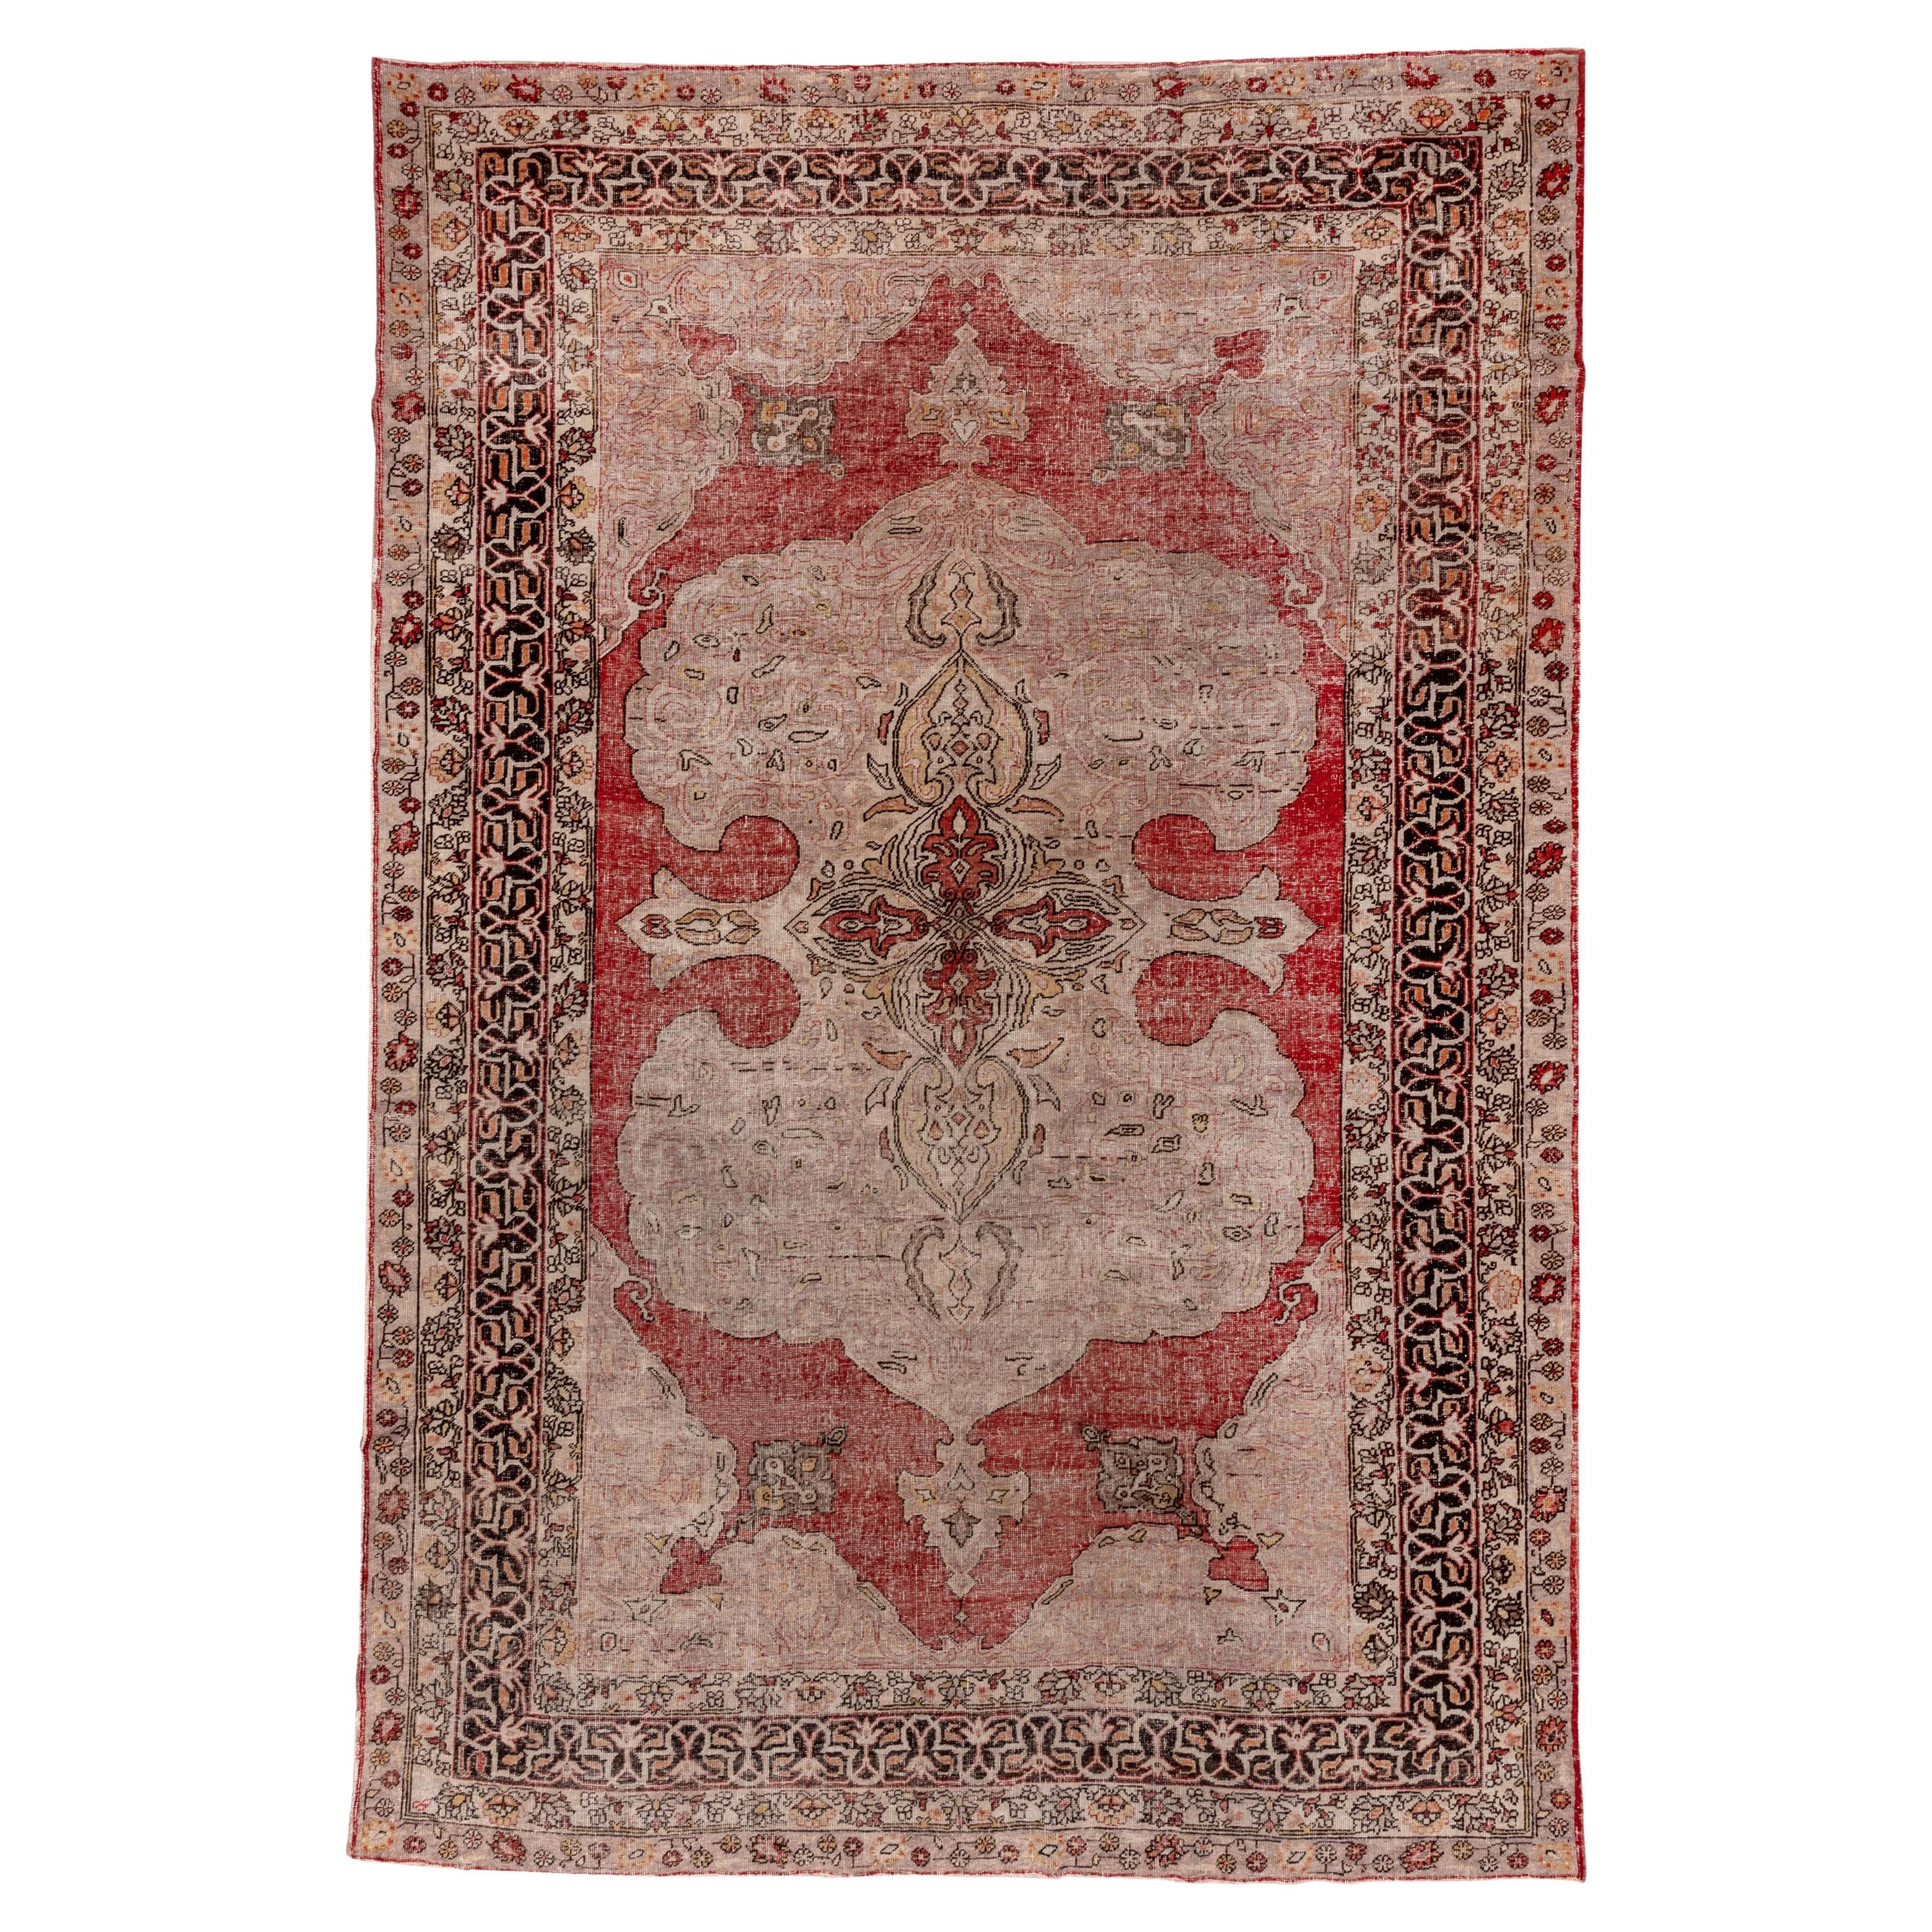 Fine Antique Turkish Oushak Rug, Red Outer Field, Bookcover Design